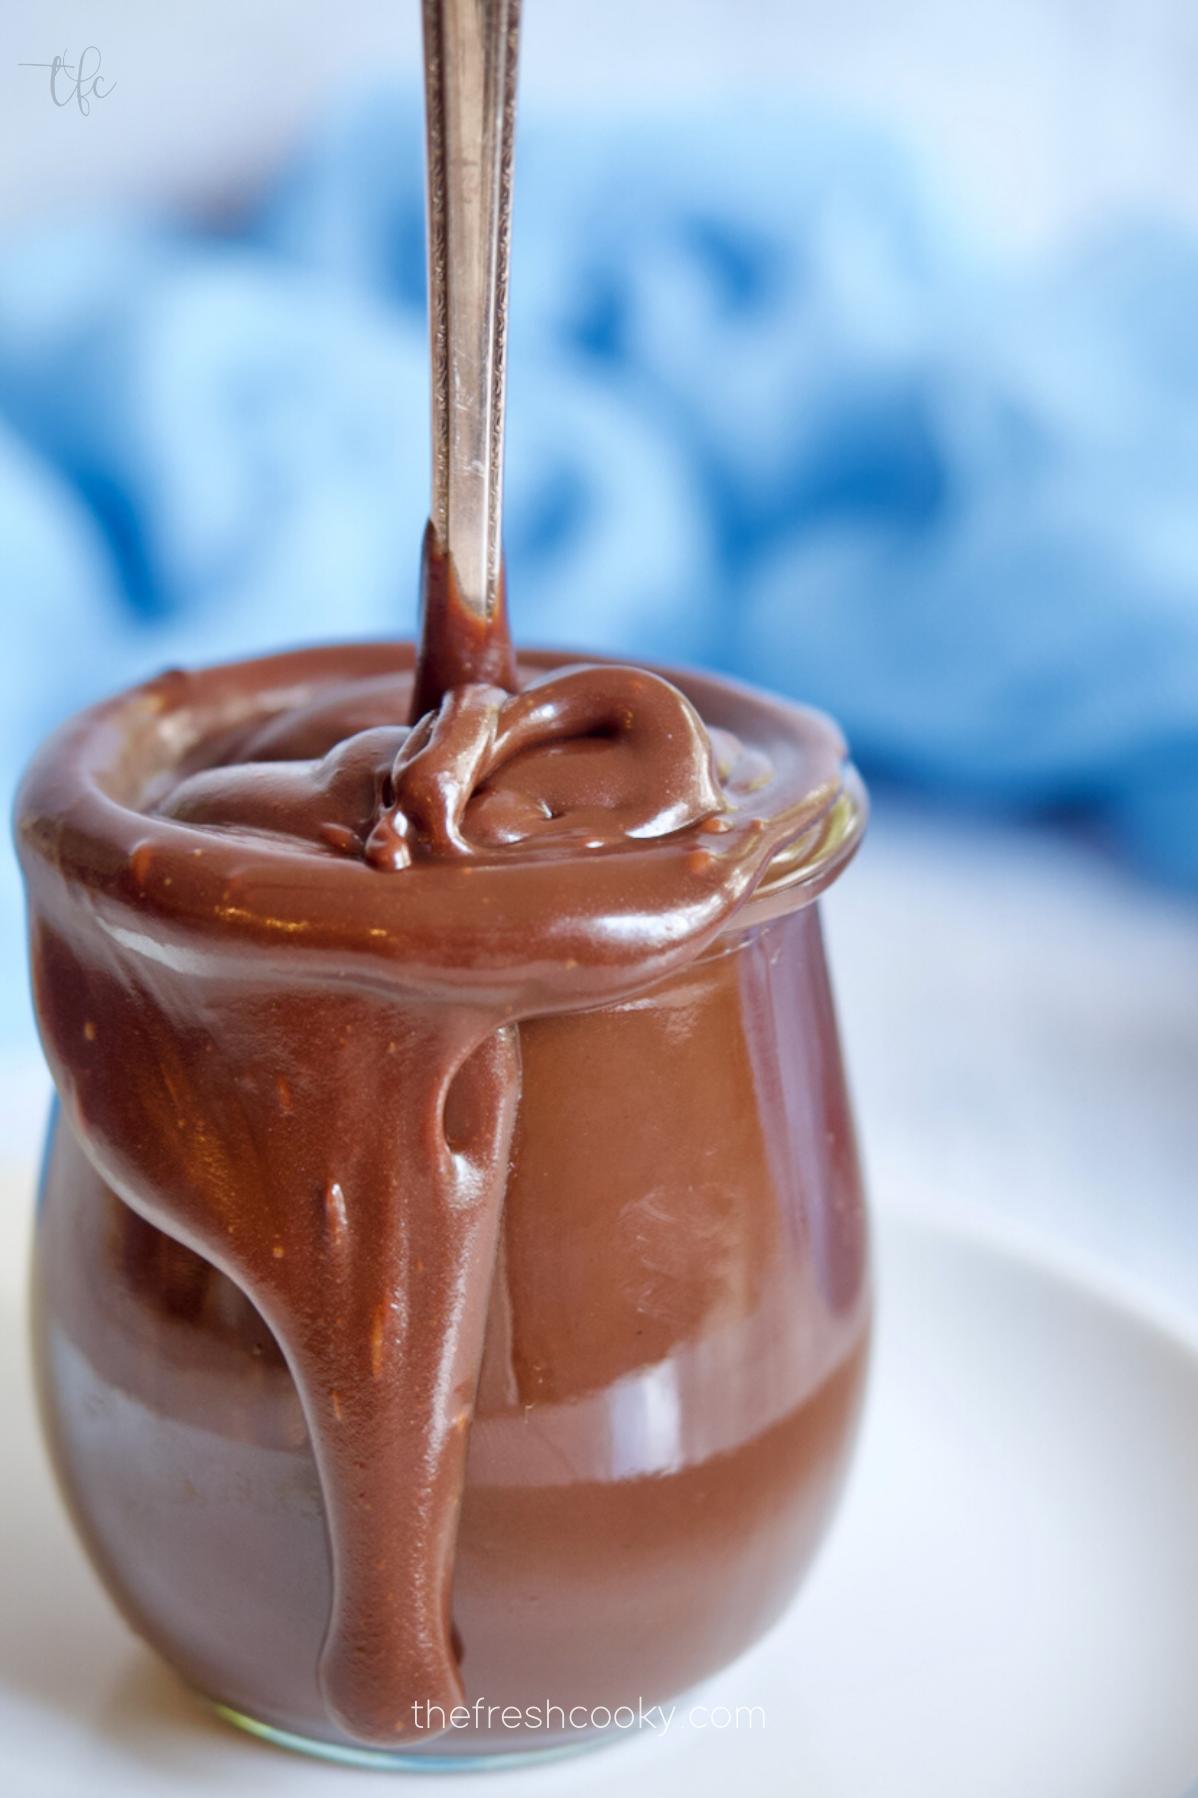  The rich and velvety fudge sauce drizzled on top is the ultimate indulgence